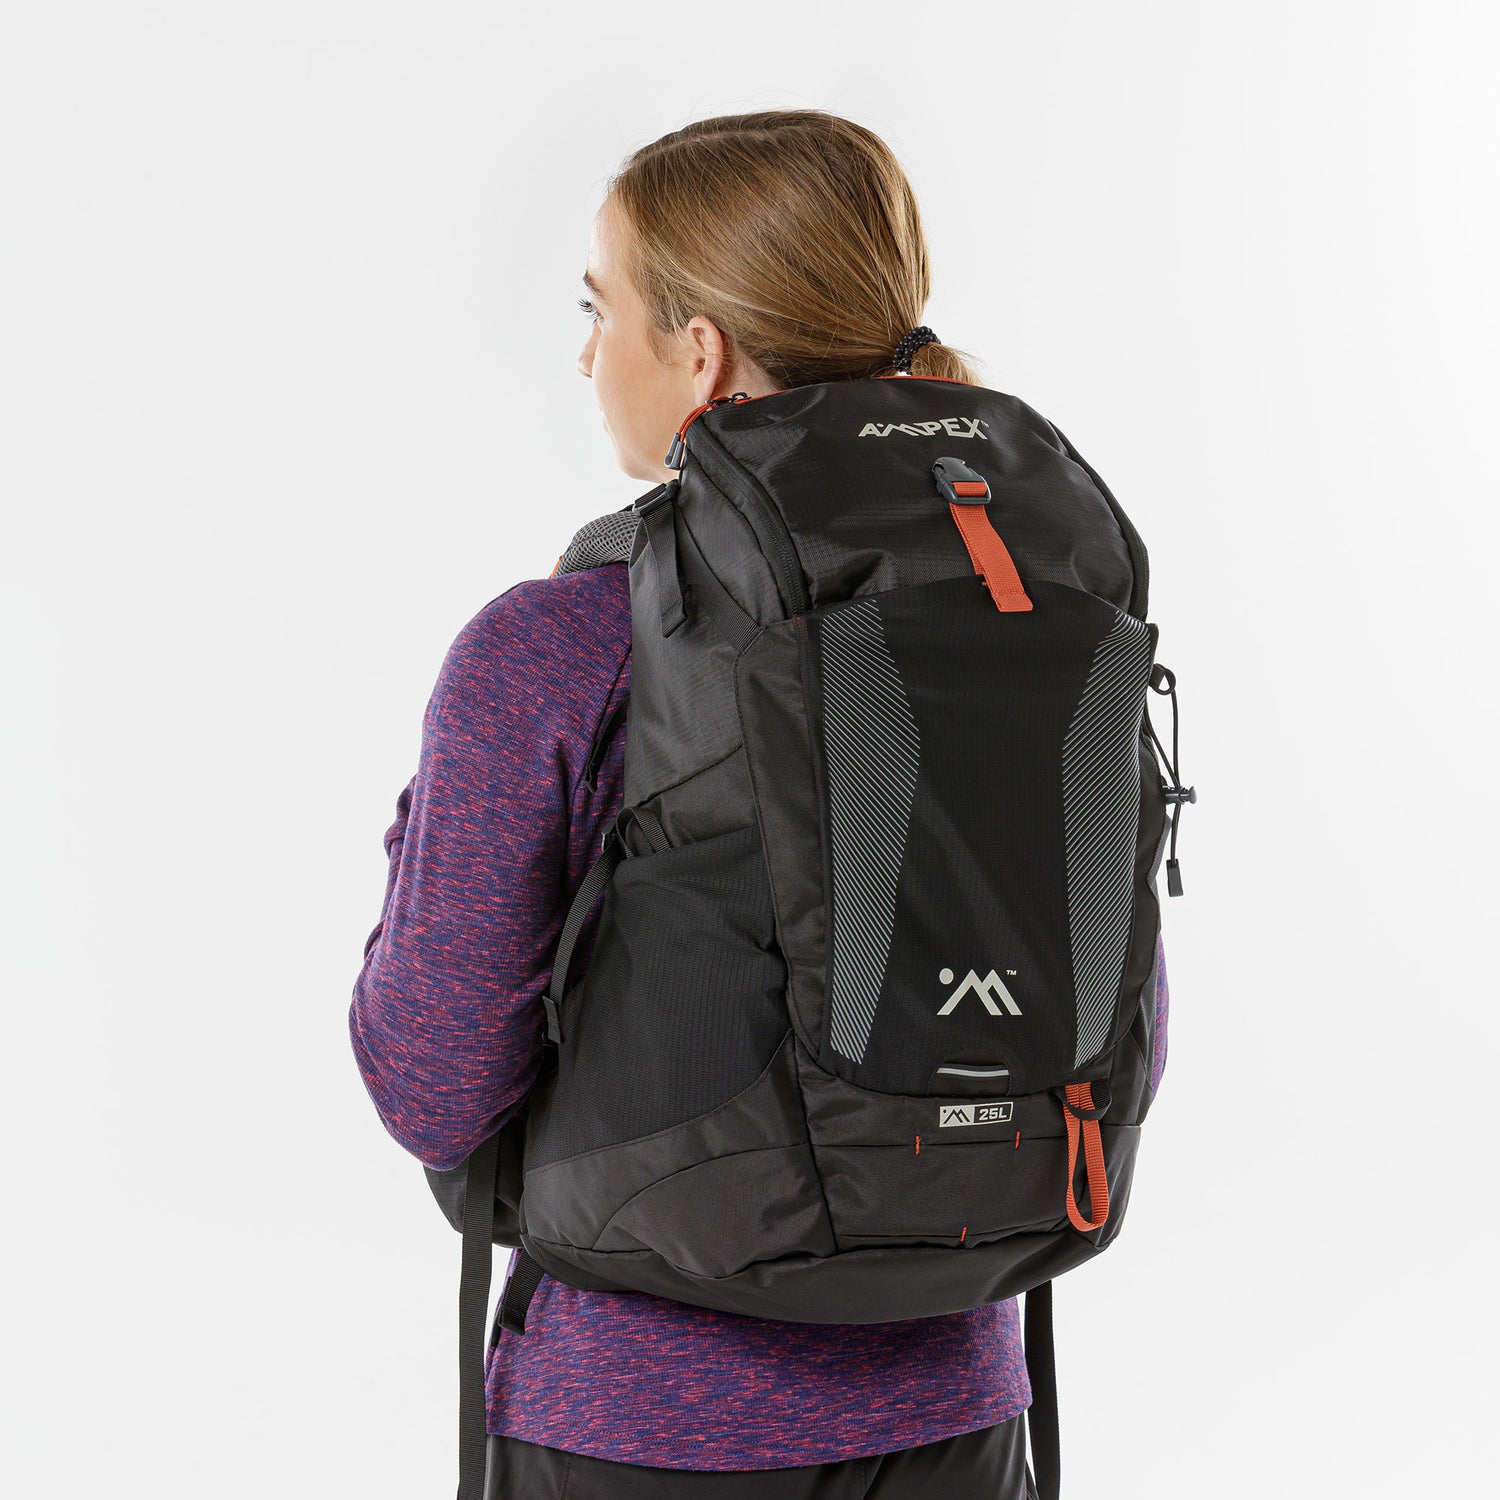 Performance Backpack 25L